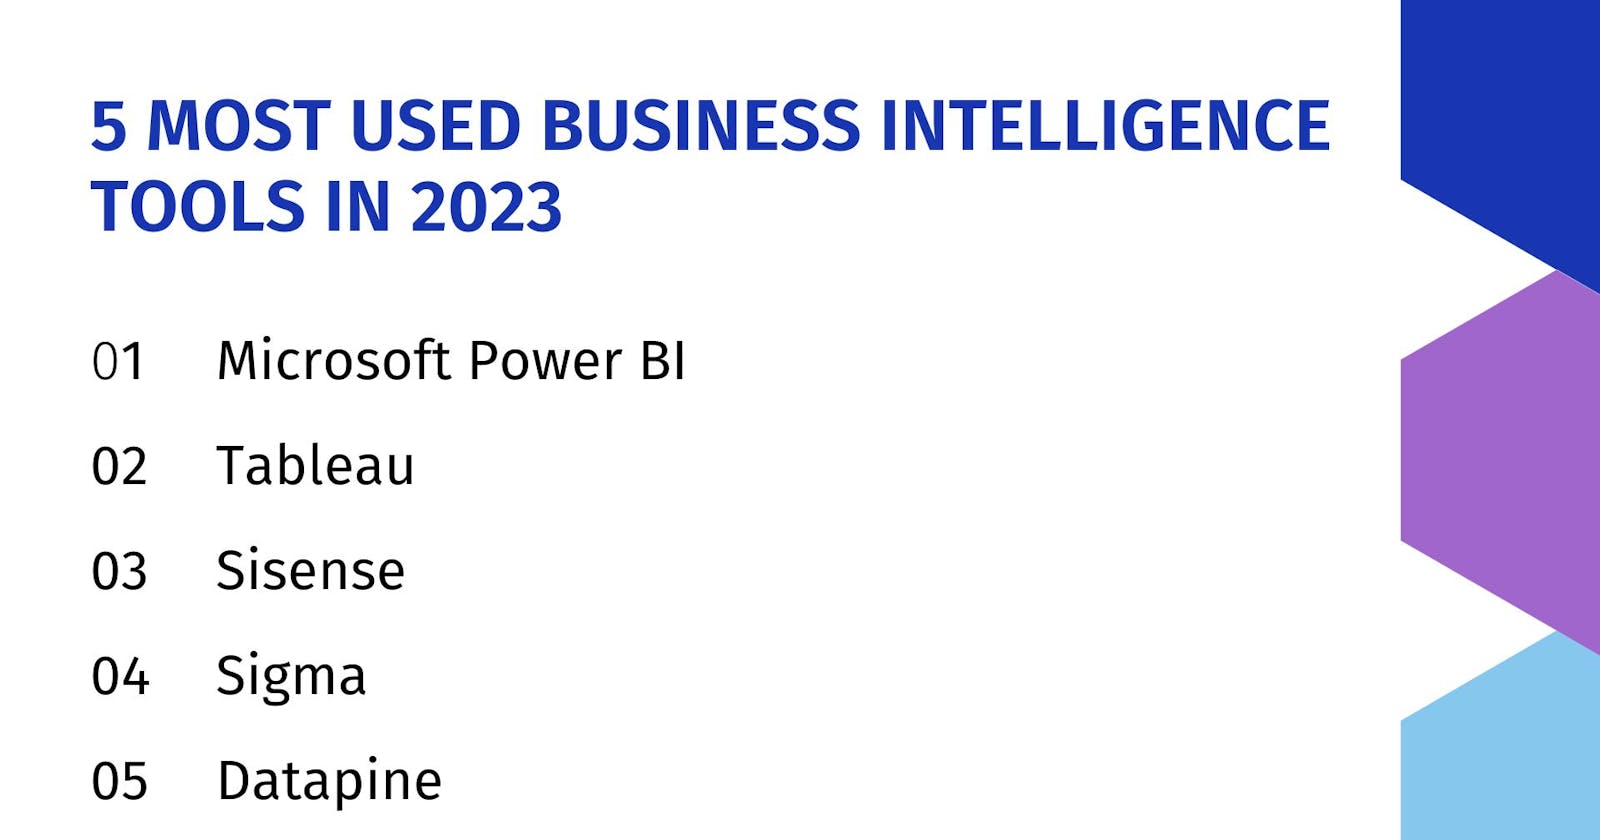 5 Most Used Business Intelligence Tools in 2023